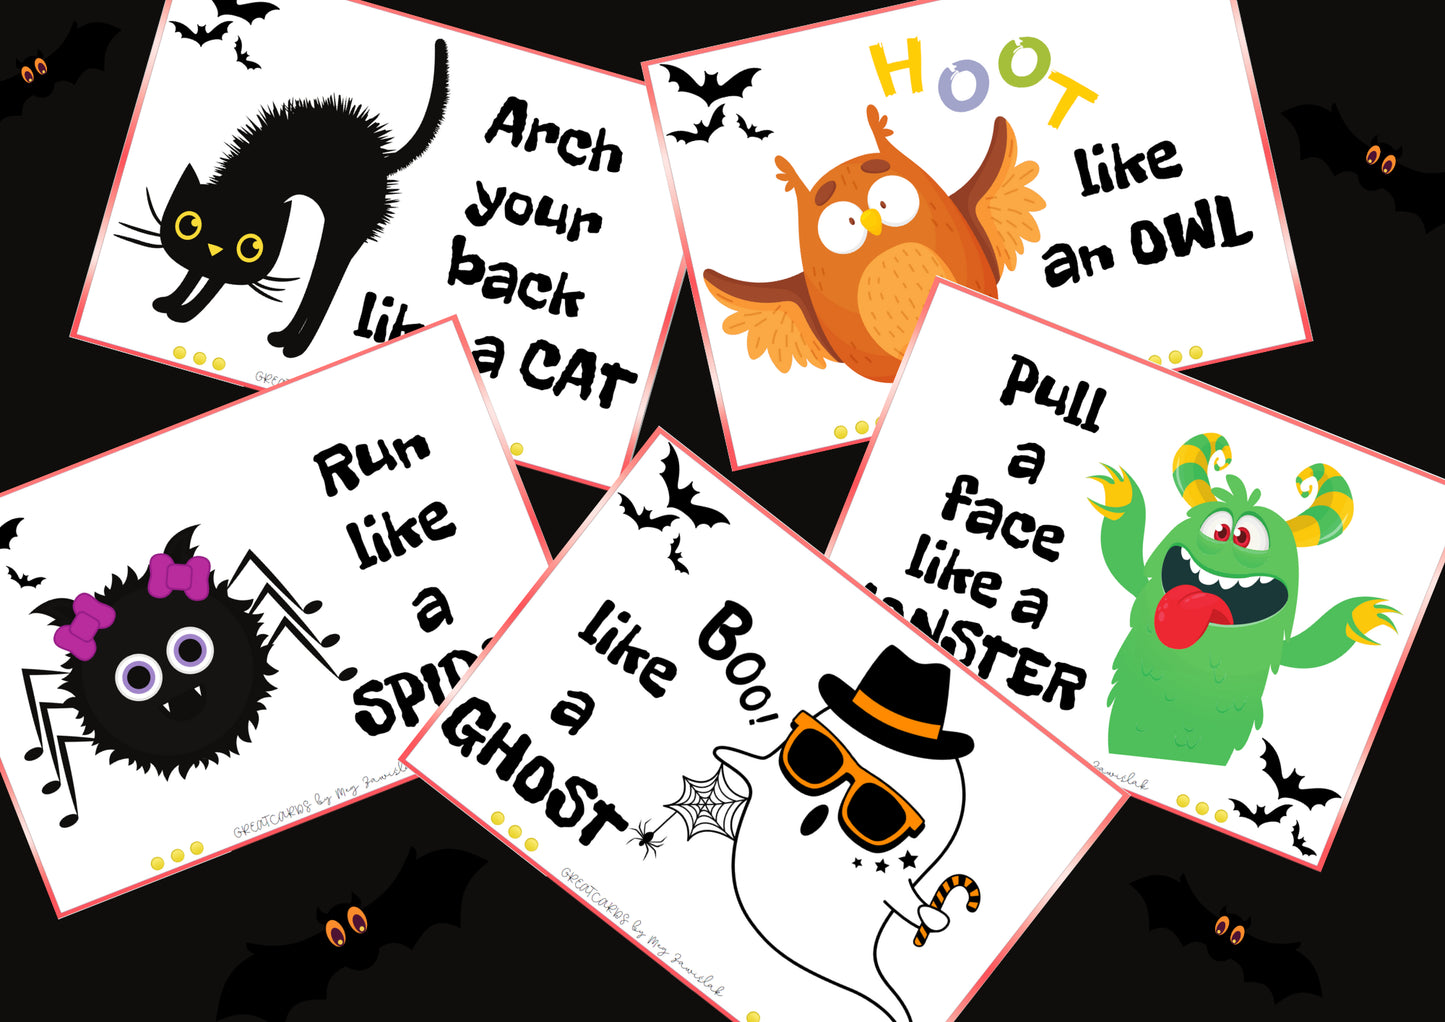 Greatcards - Halloween Action Cards